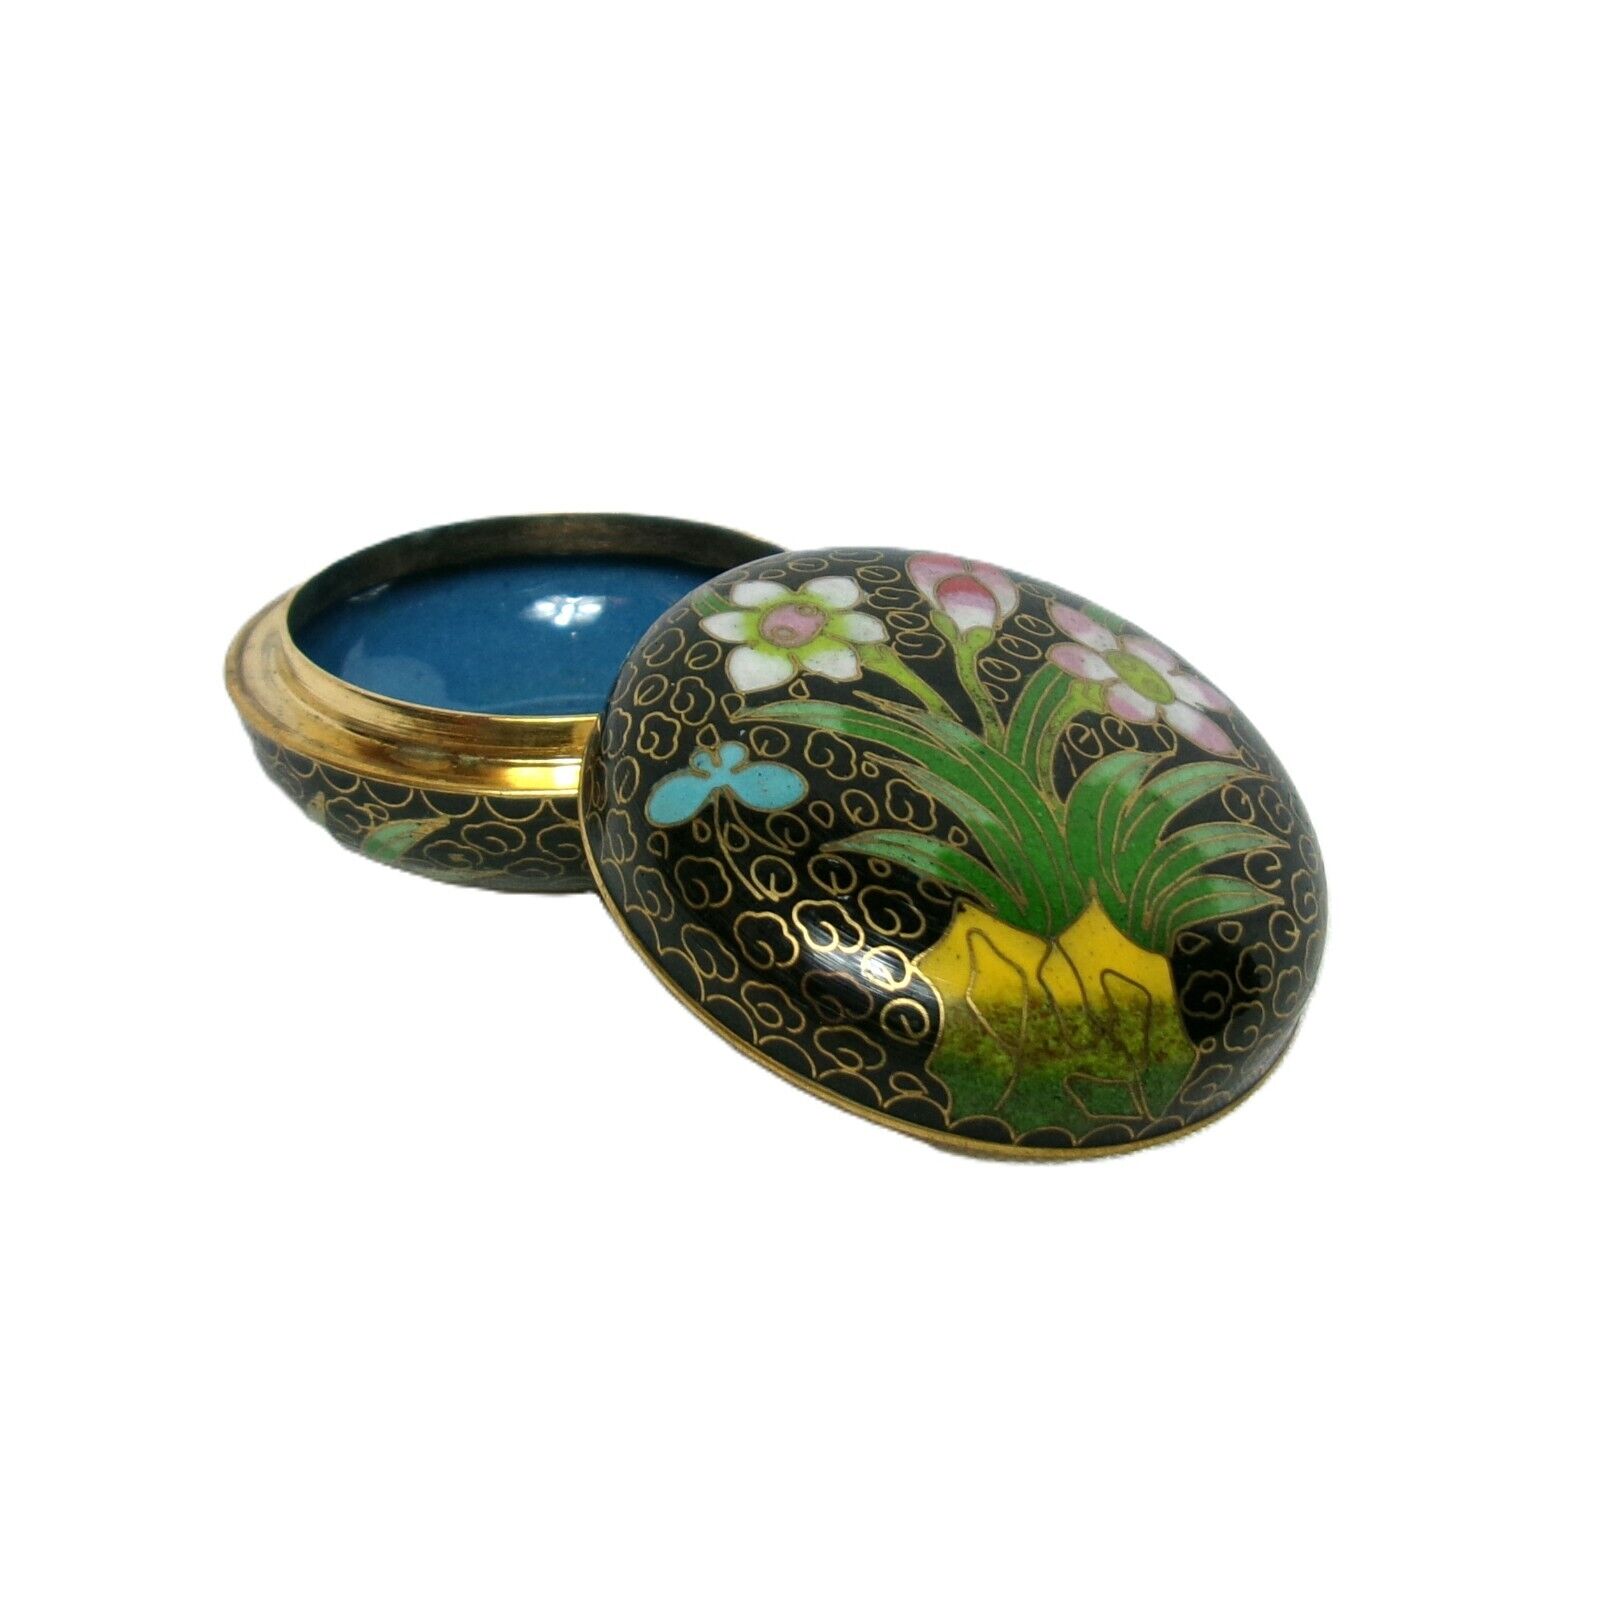 Gorgeous Multicolored Chinese CLOISONNE Enameled Brass Vintage Pill Trinket Box